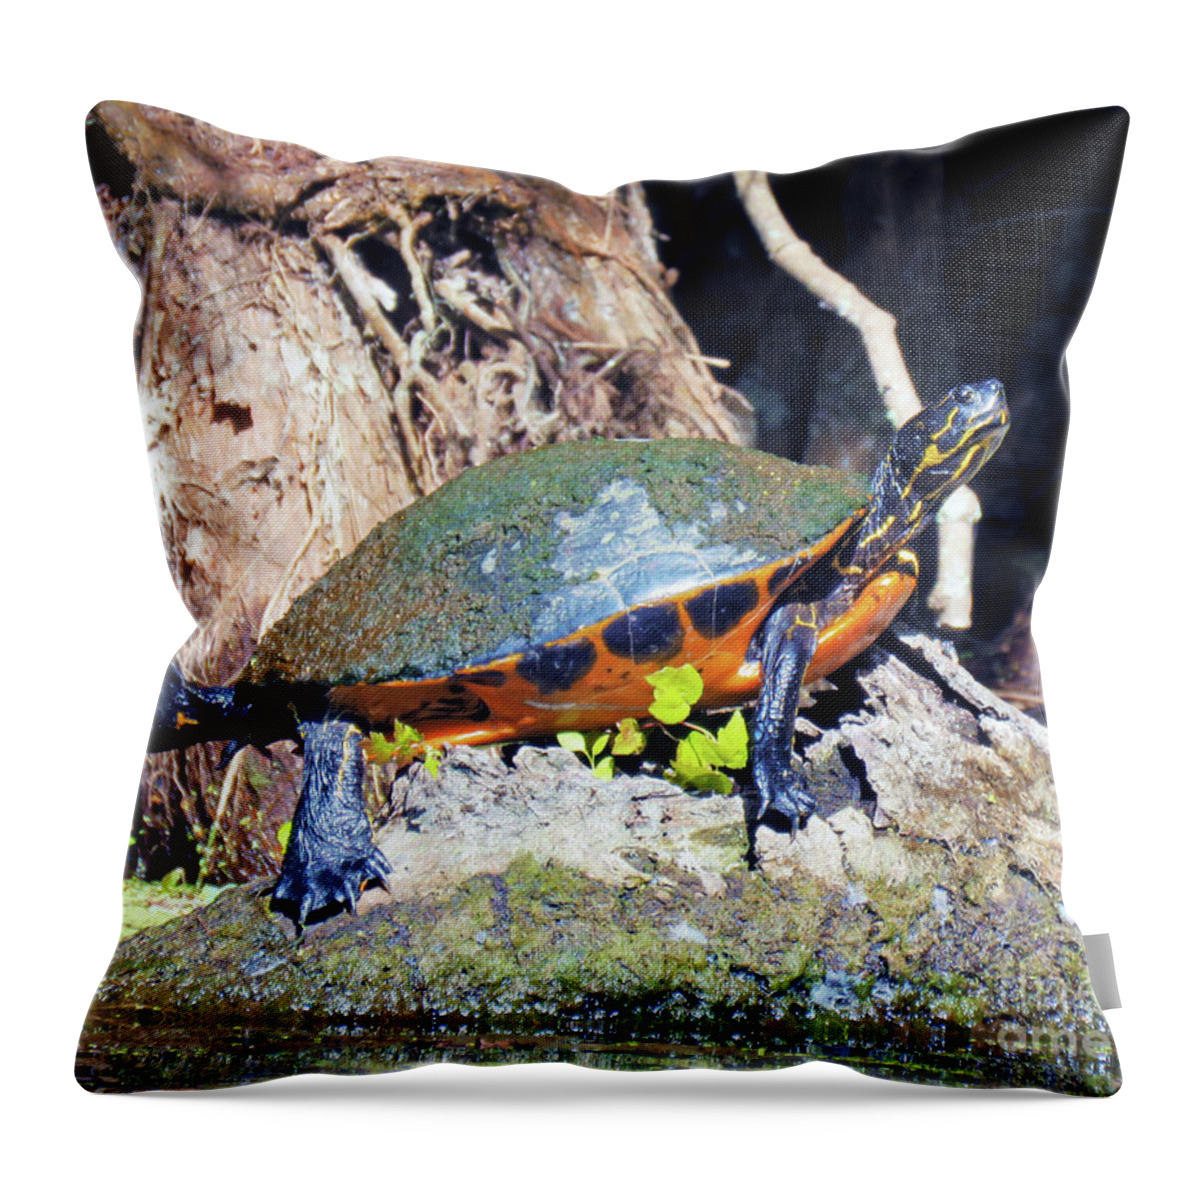 Florida Throw Pillow featuring the photograph Surroundings - Silver Springs Sunbathing Turtle by Chris Andruskiewicz